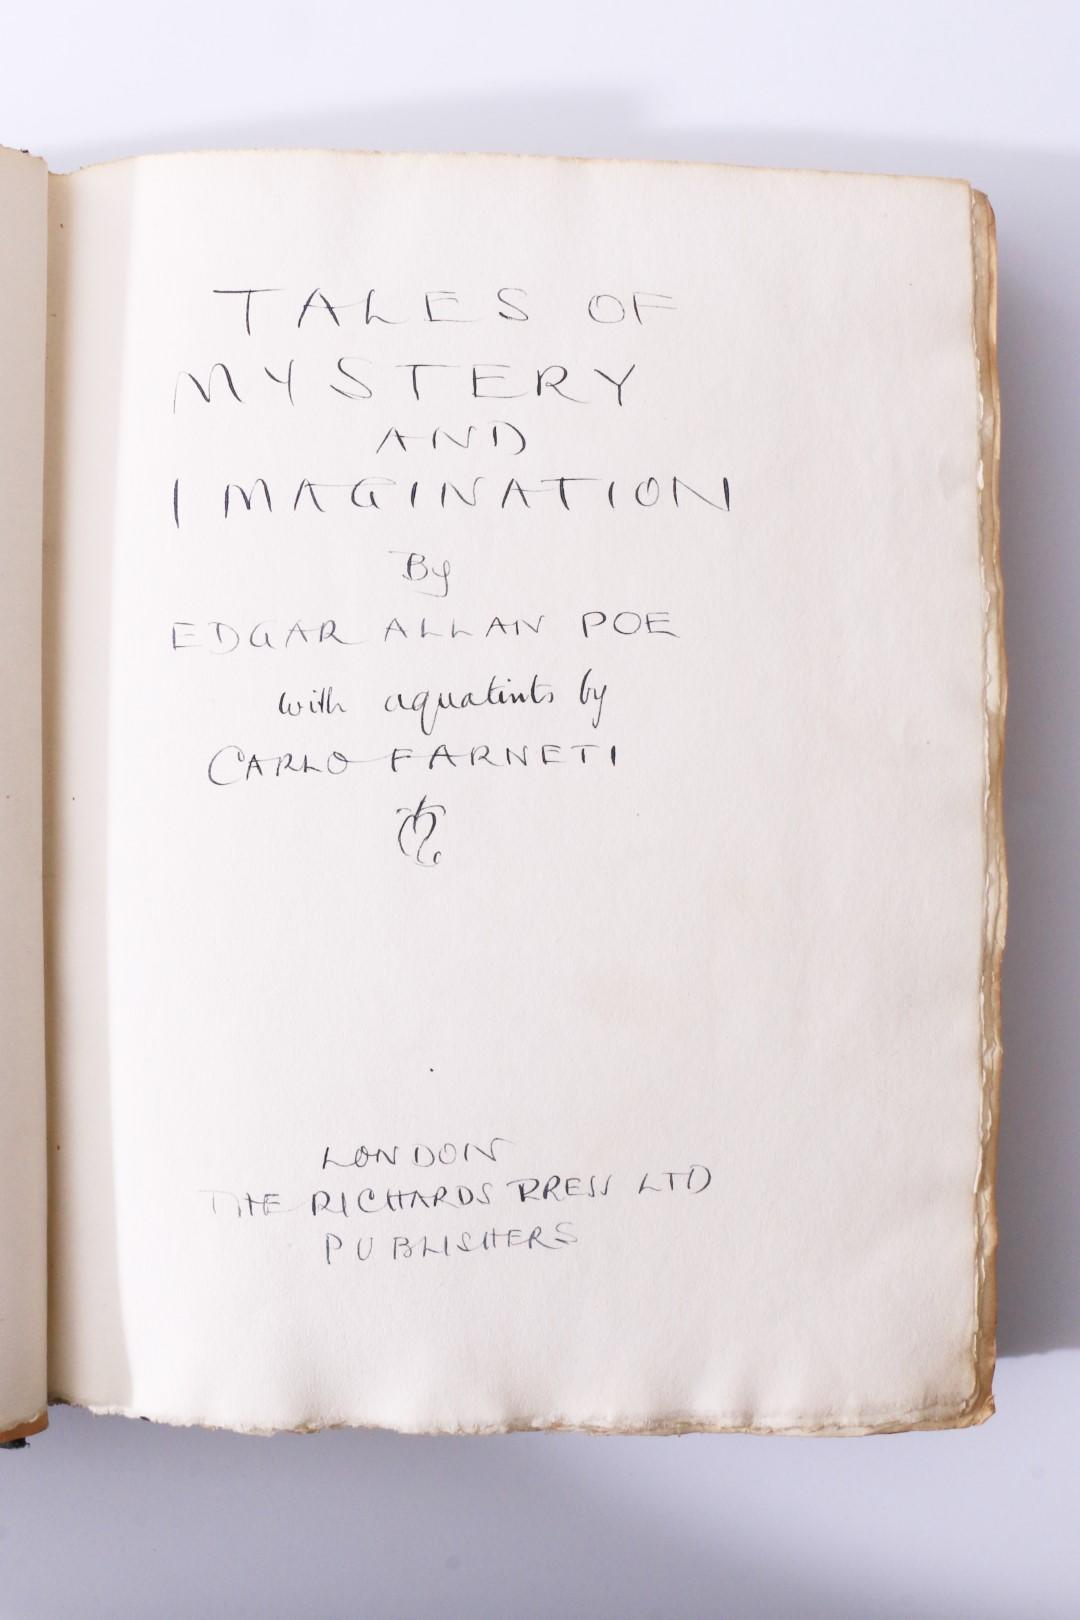 Edgar Allan Poe - Tales of Mystery and Imagination - An Unpublished Edition - The Richards Press, n.d. c[1938], Manuscript.